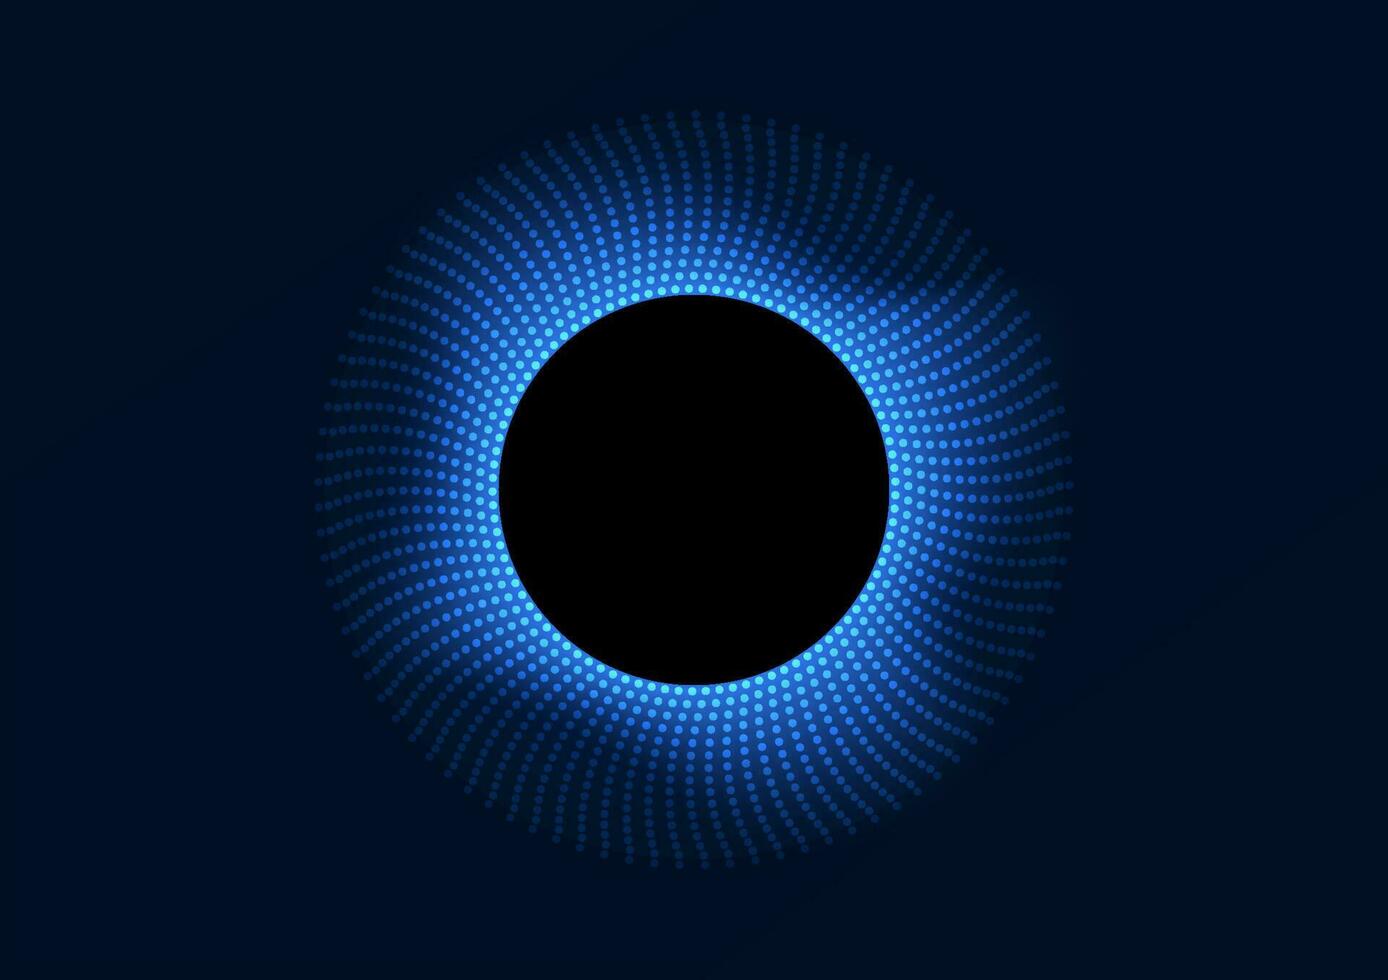 Abstract background technology Shows processors fetching information through the Internet of Technology as quickly as a black hole that devours everything. circle with dots scattering sides vector